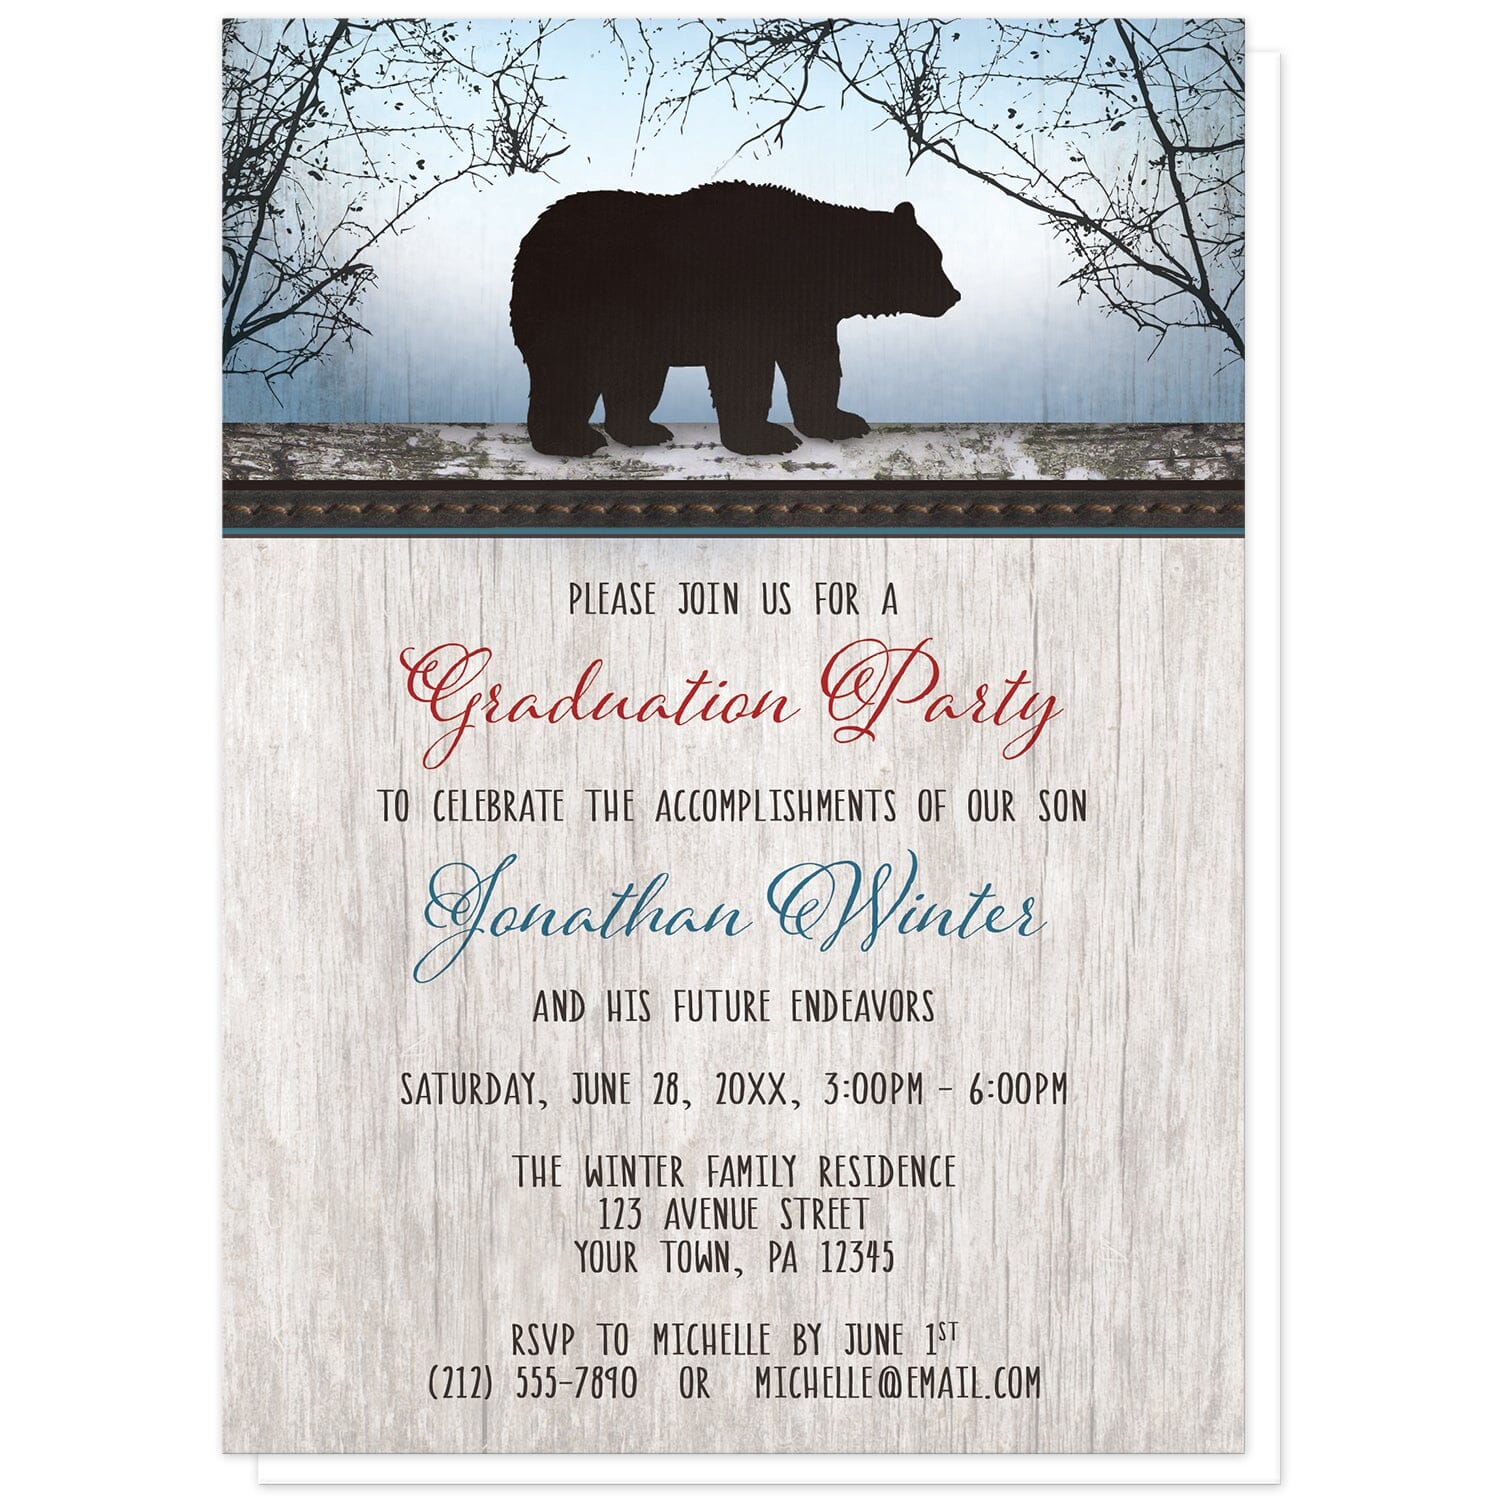 Rustic Bear Wood Red Blue Graduation Party Invitations at Artistically Invited. Rustic bear wood red blue graduation party invitations with a dark silhouette bear on wooden log at the top, over a blue background with trees and a wood watermark. Your personalized graduation party details are custom printed in red, blue, and dark brown over a light rustic wood texture background below the bear design.